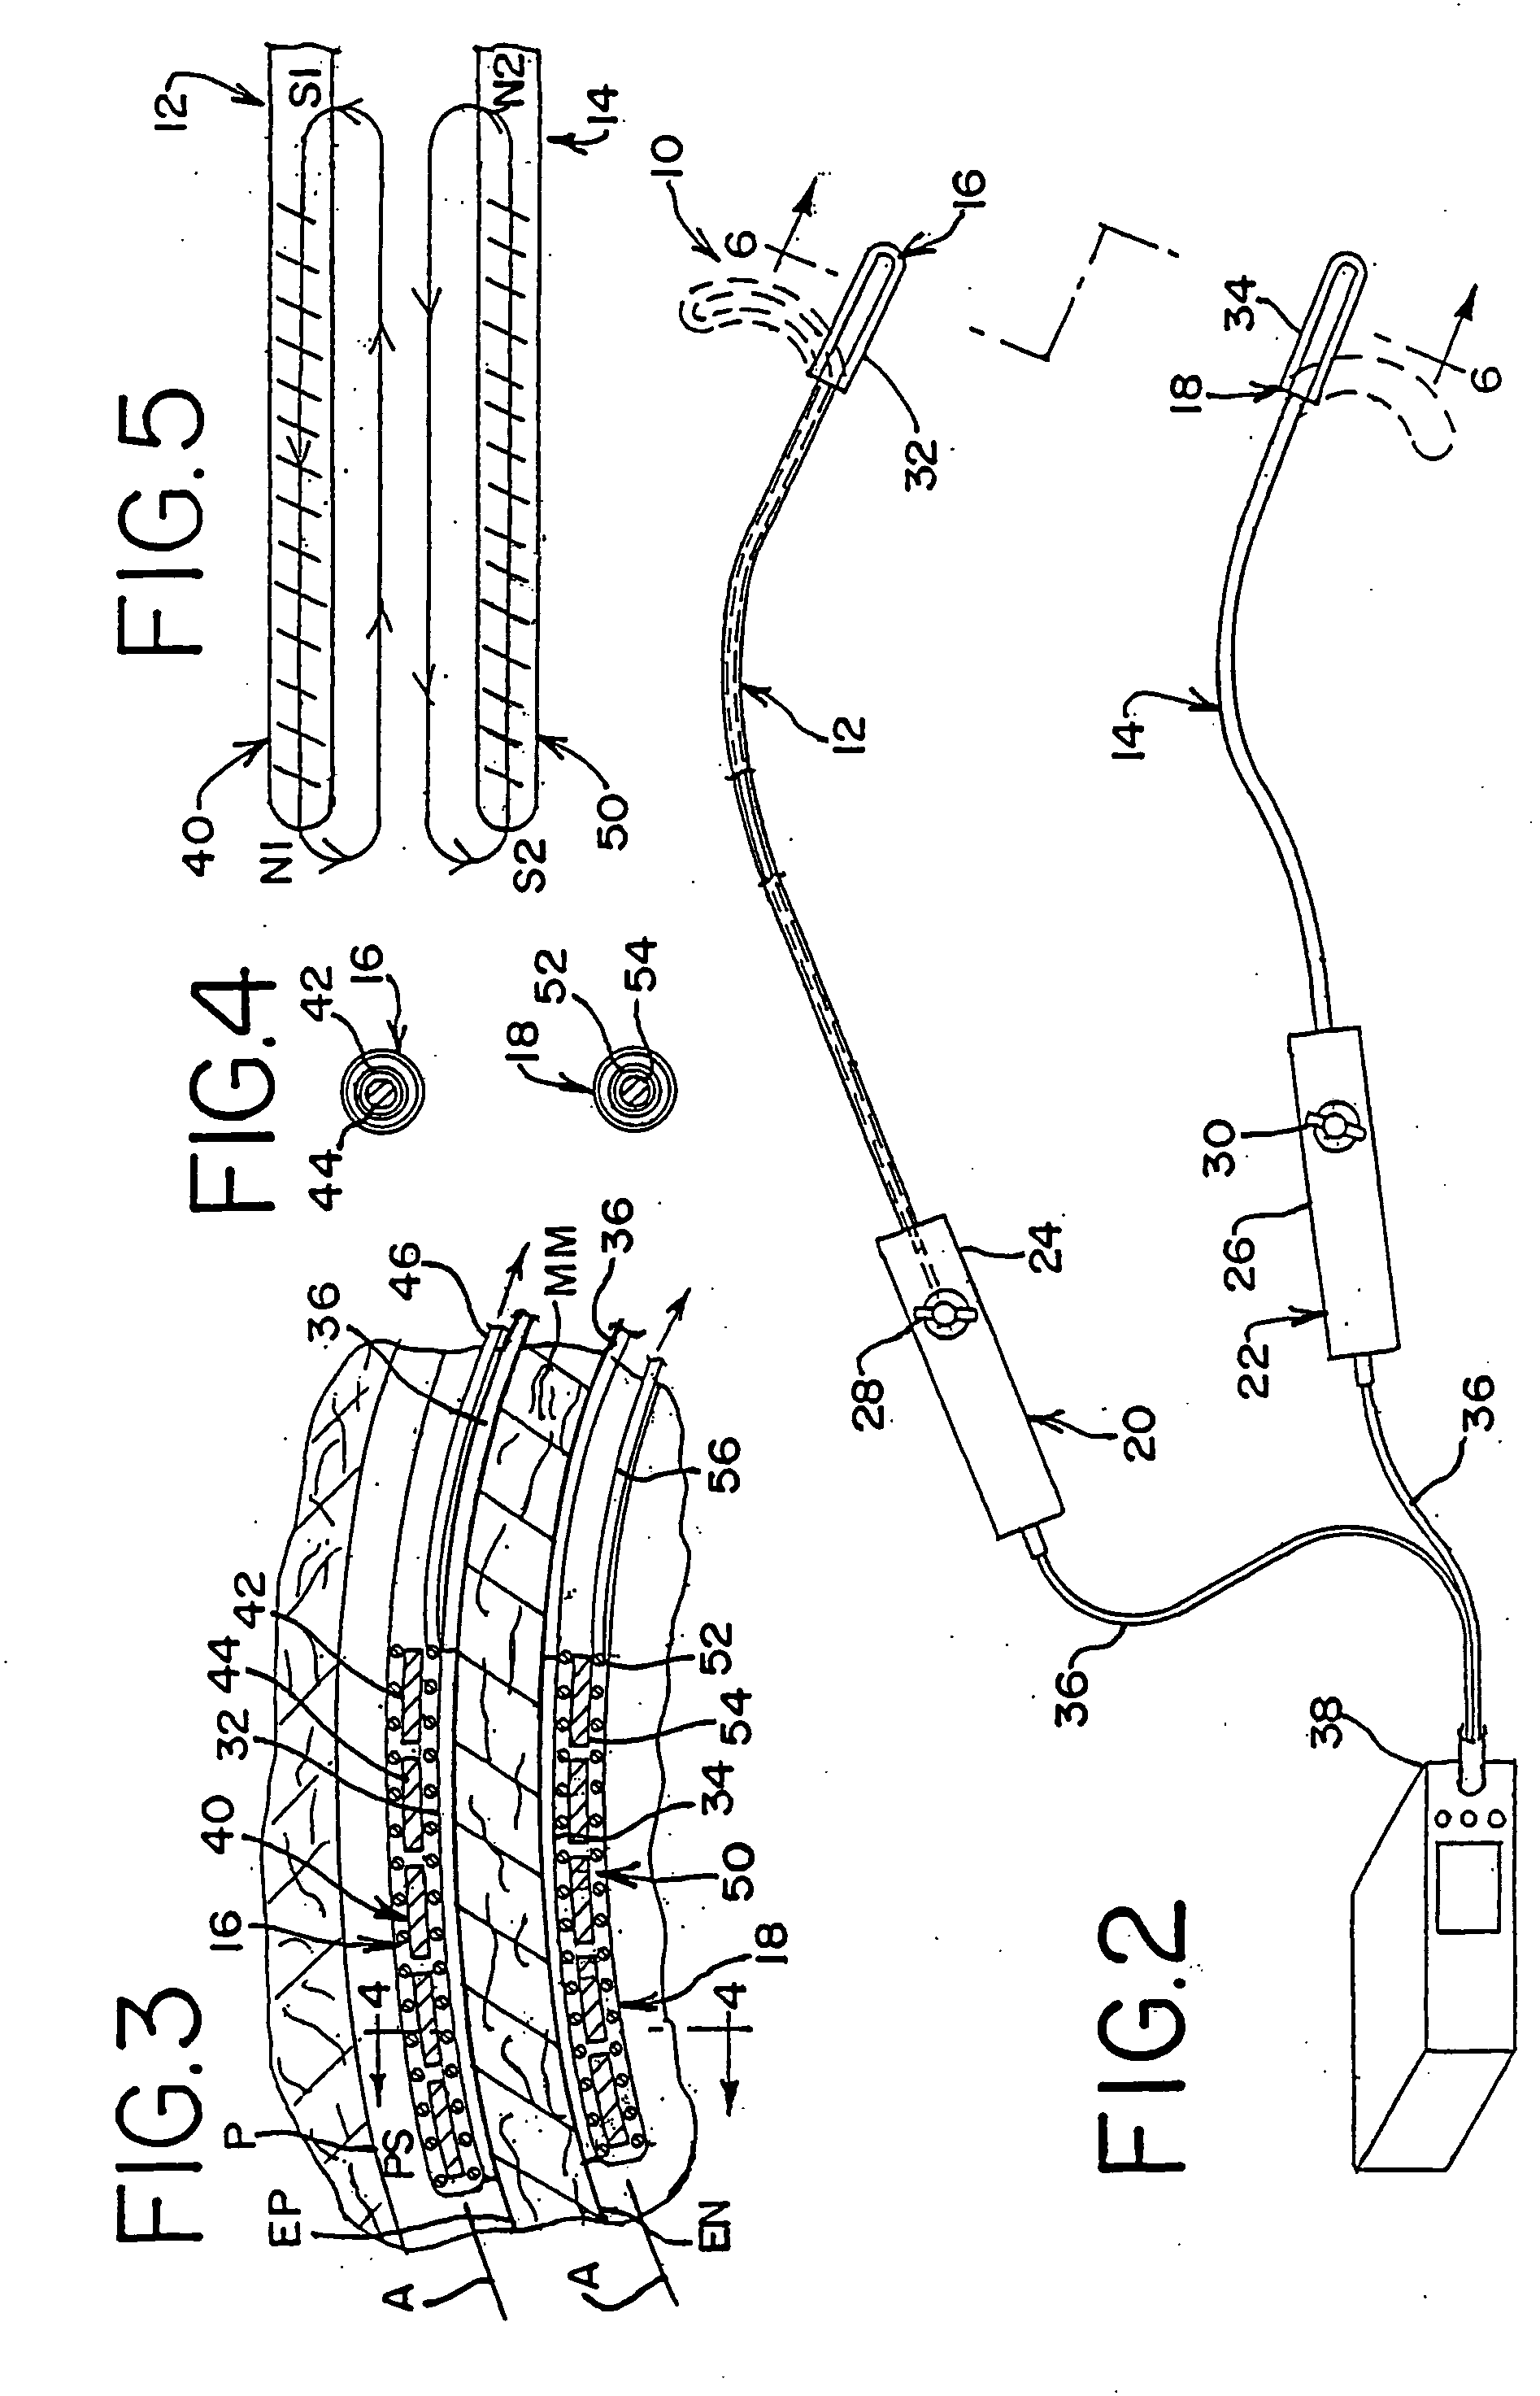 Magnetic catheter ablation device and method